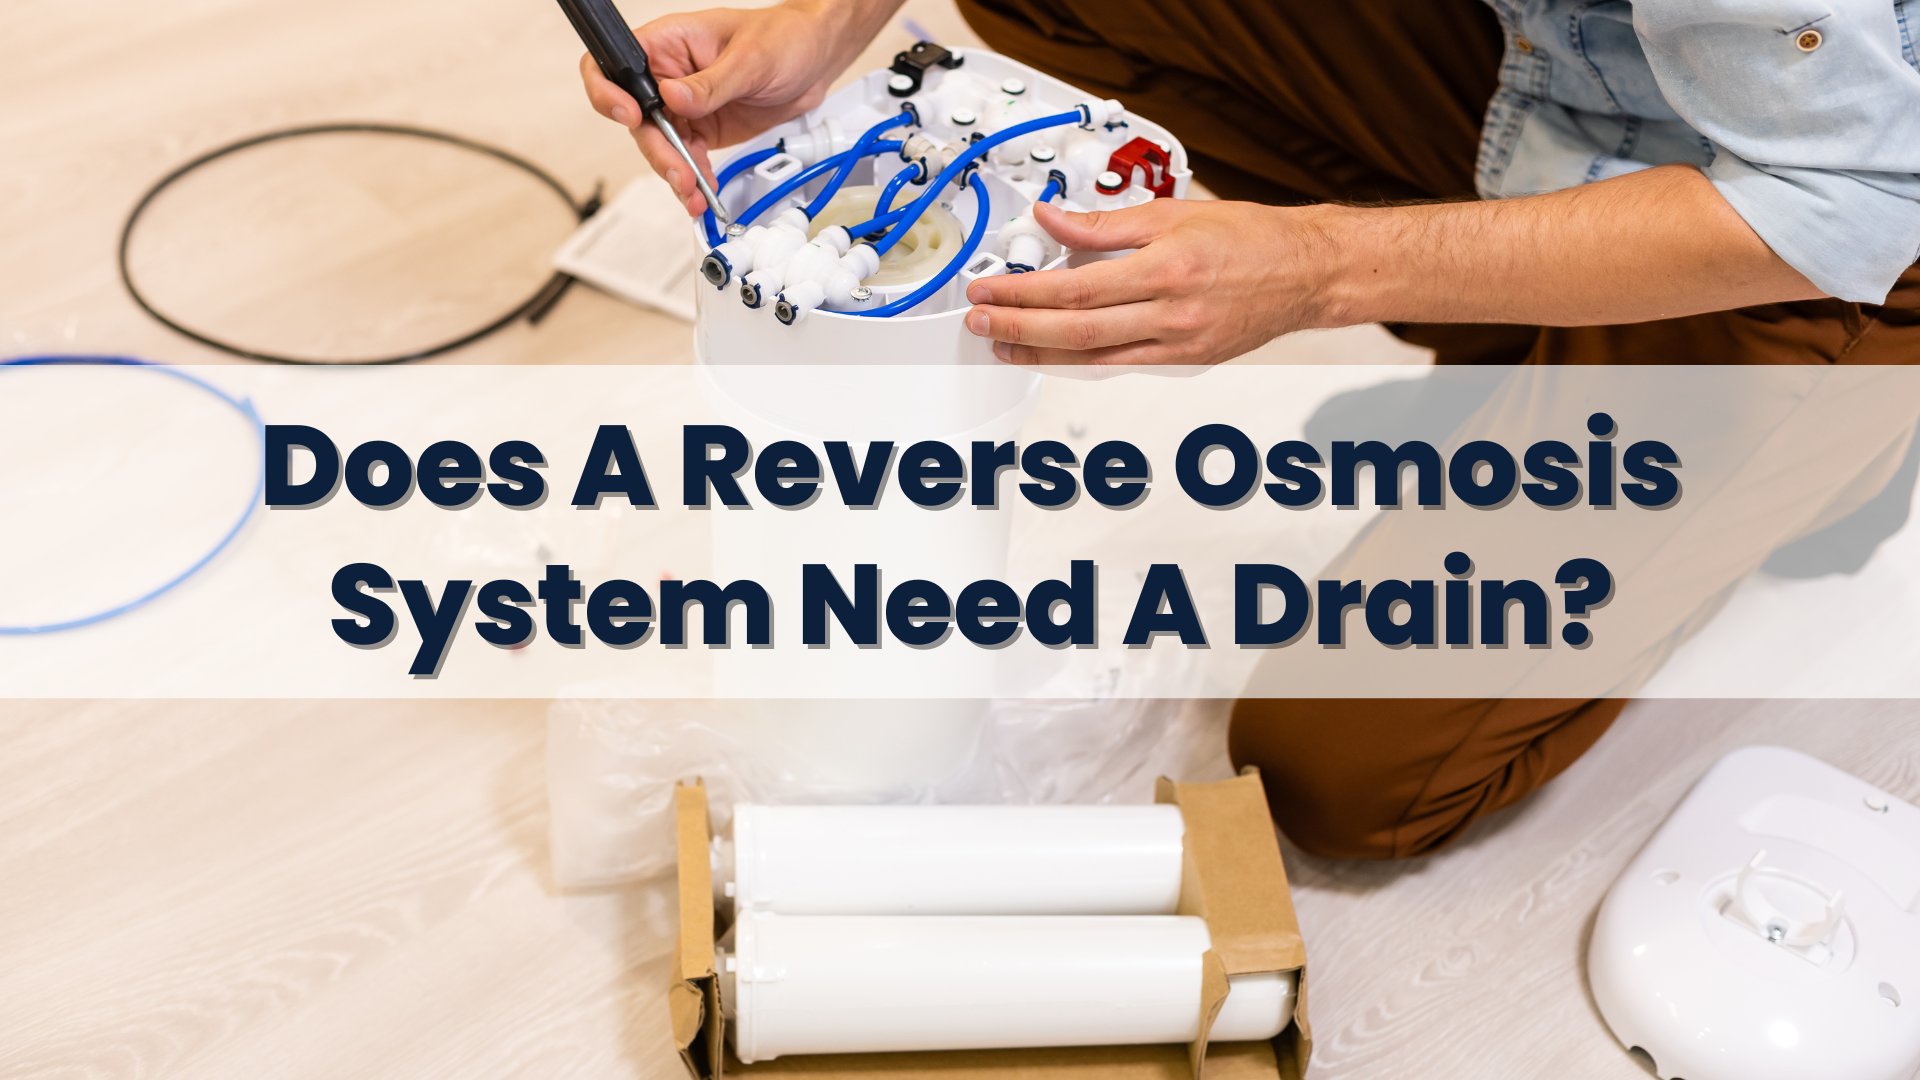 Does A Reverse Osmosis System Need A Drain